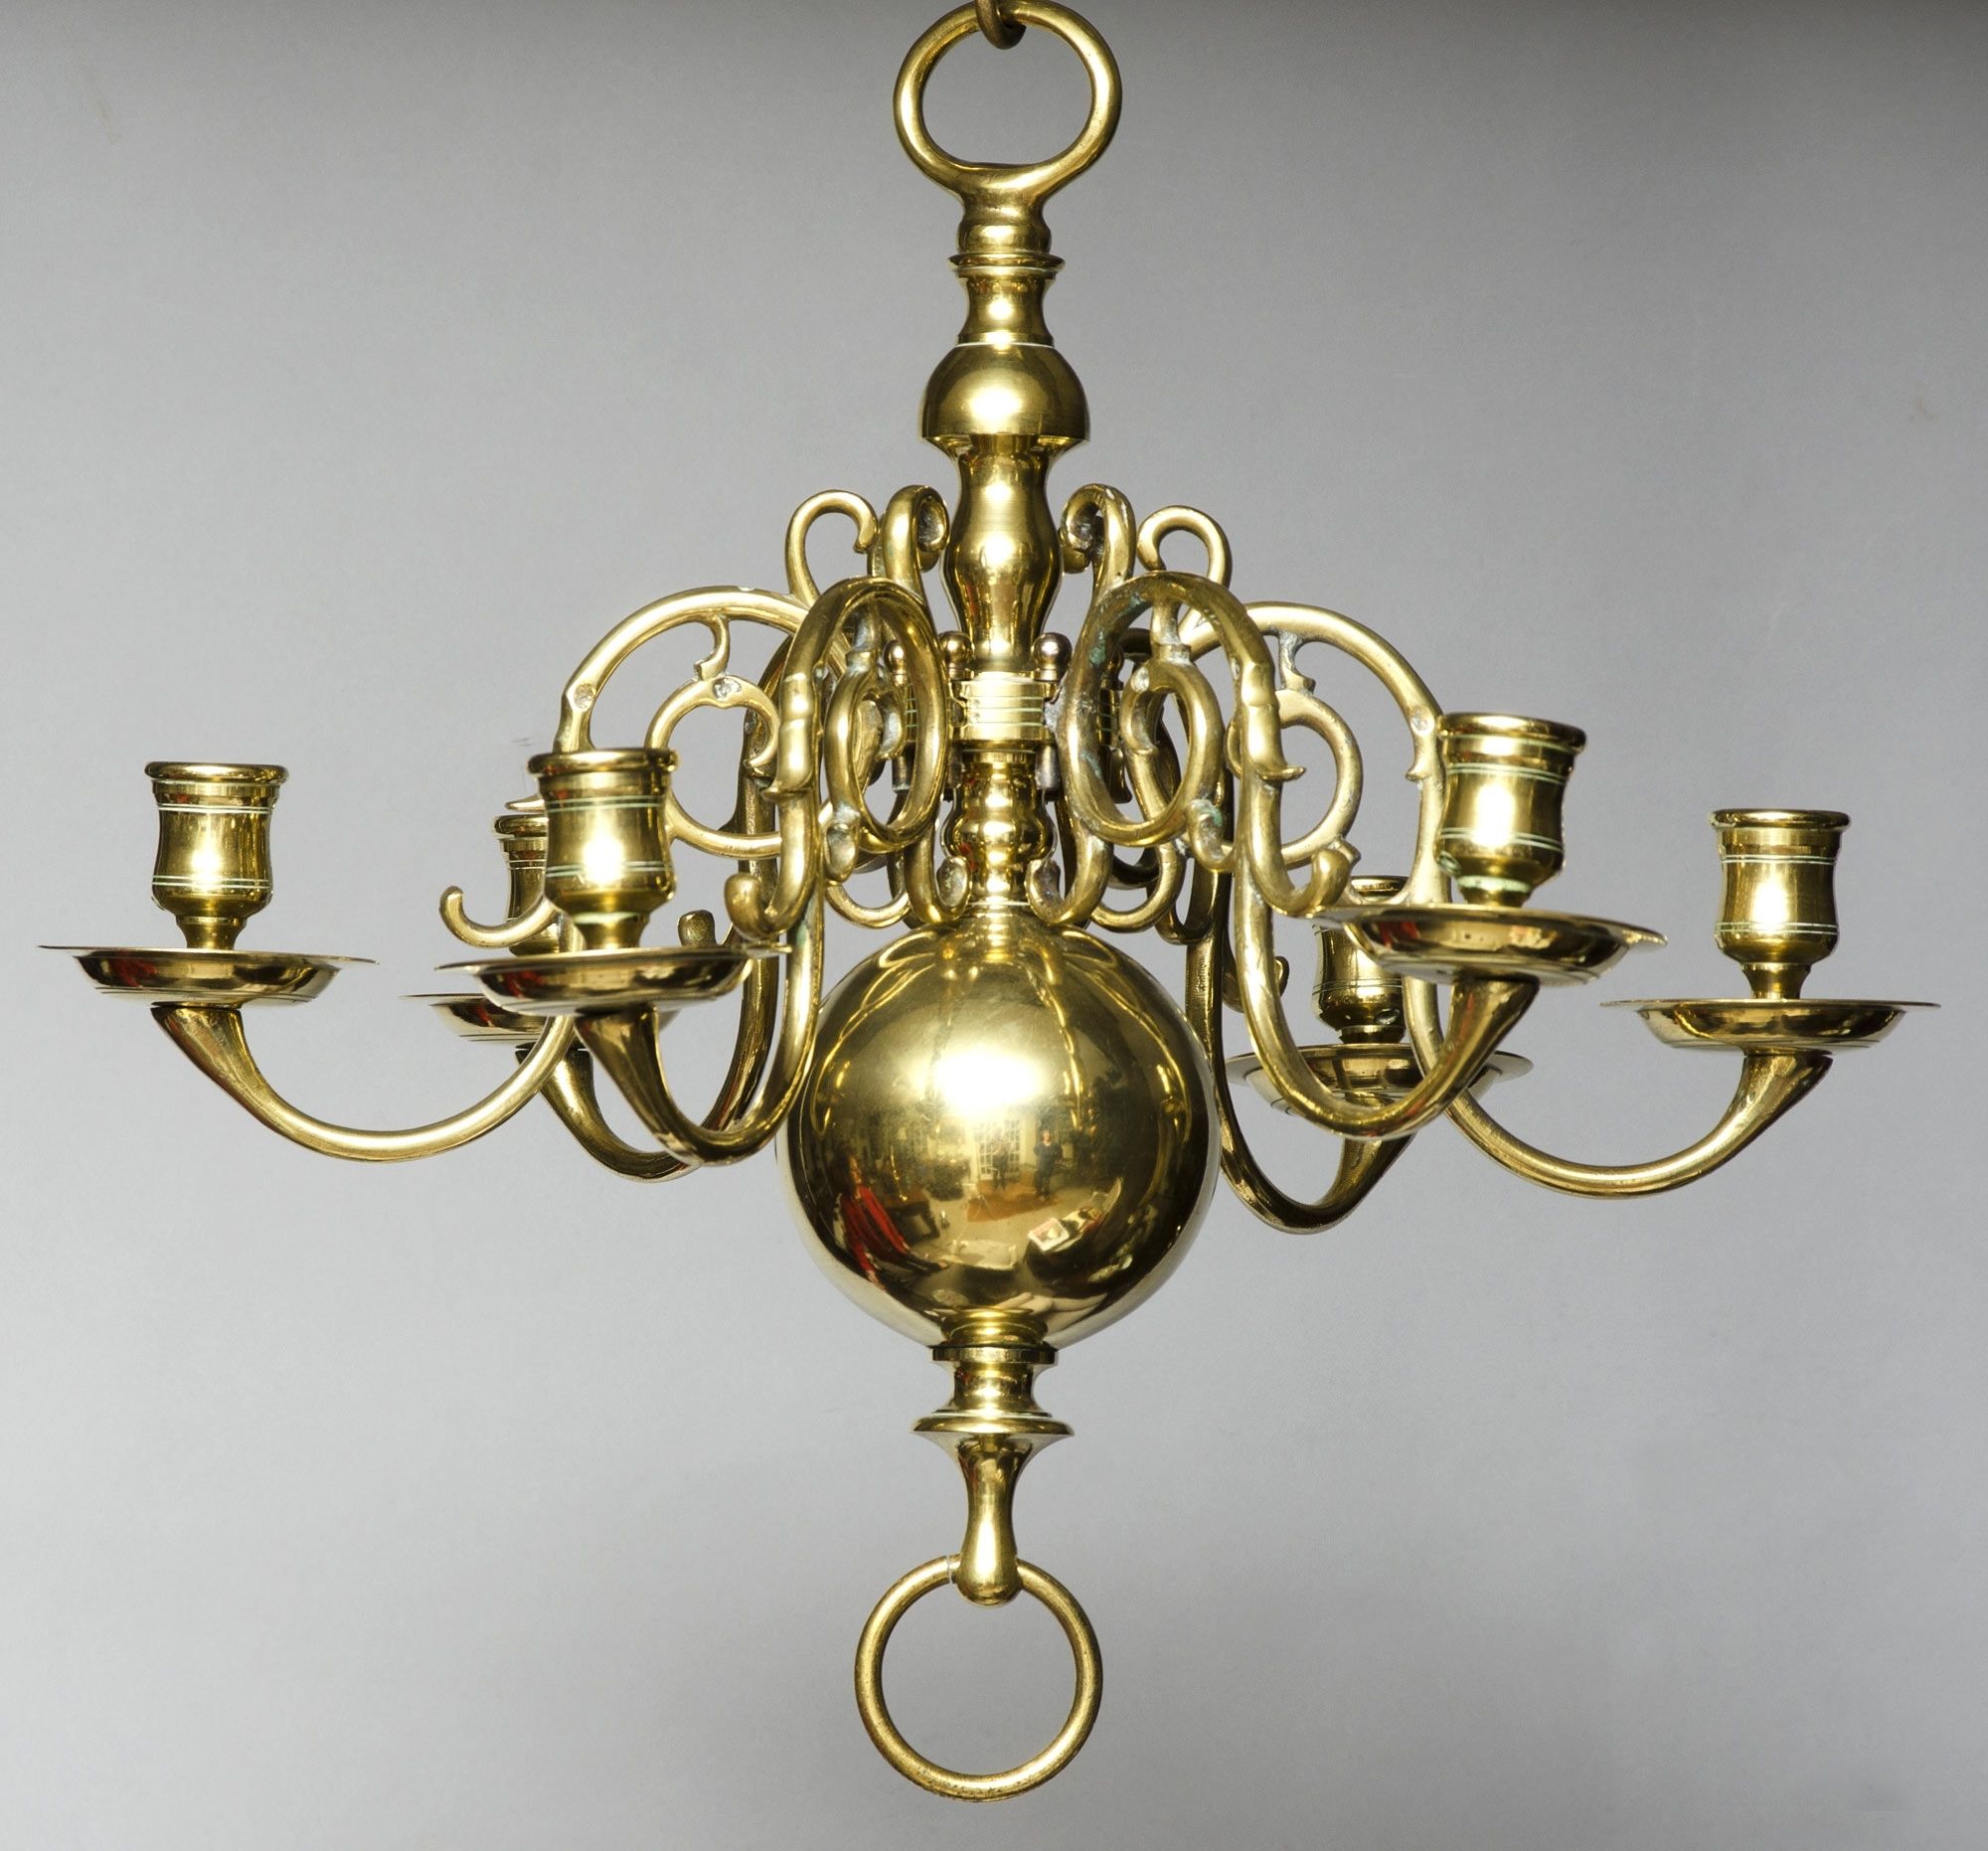 Preferred Traditional Antique Brass Chandeliers – Chandelier Designs Pertaining To Traditional Brass Chandeliers (View 4 of 15)